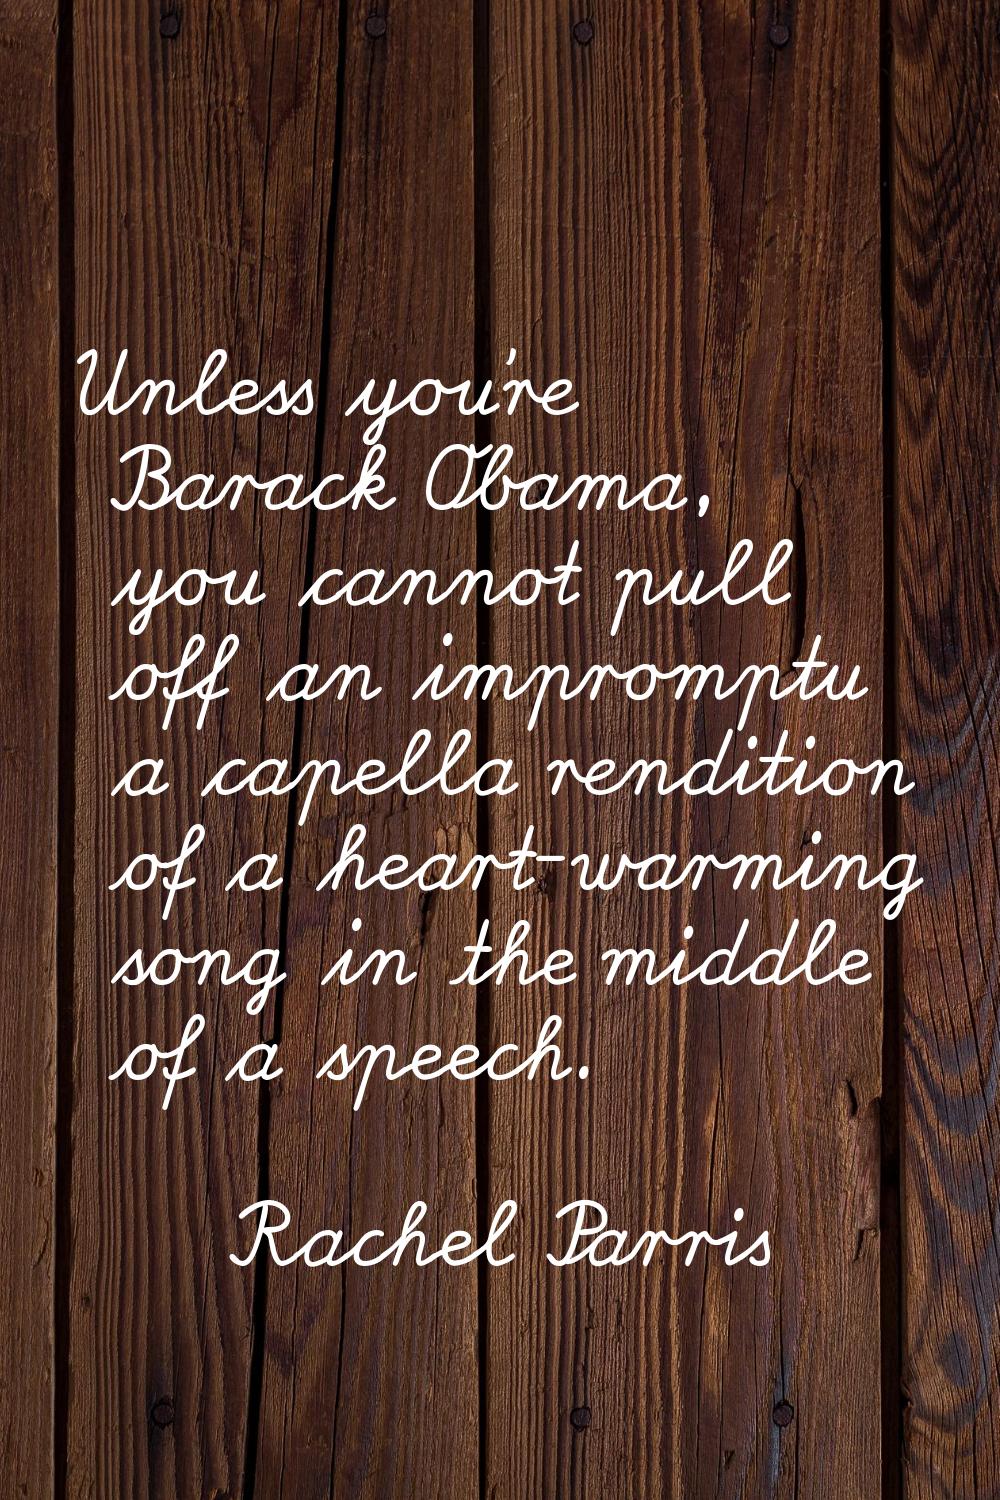 Unless you’re Barack Obama, you cannot pull off an impromptu a capella rendition of a heart-warming